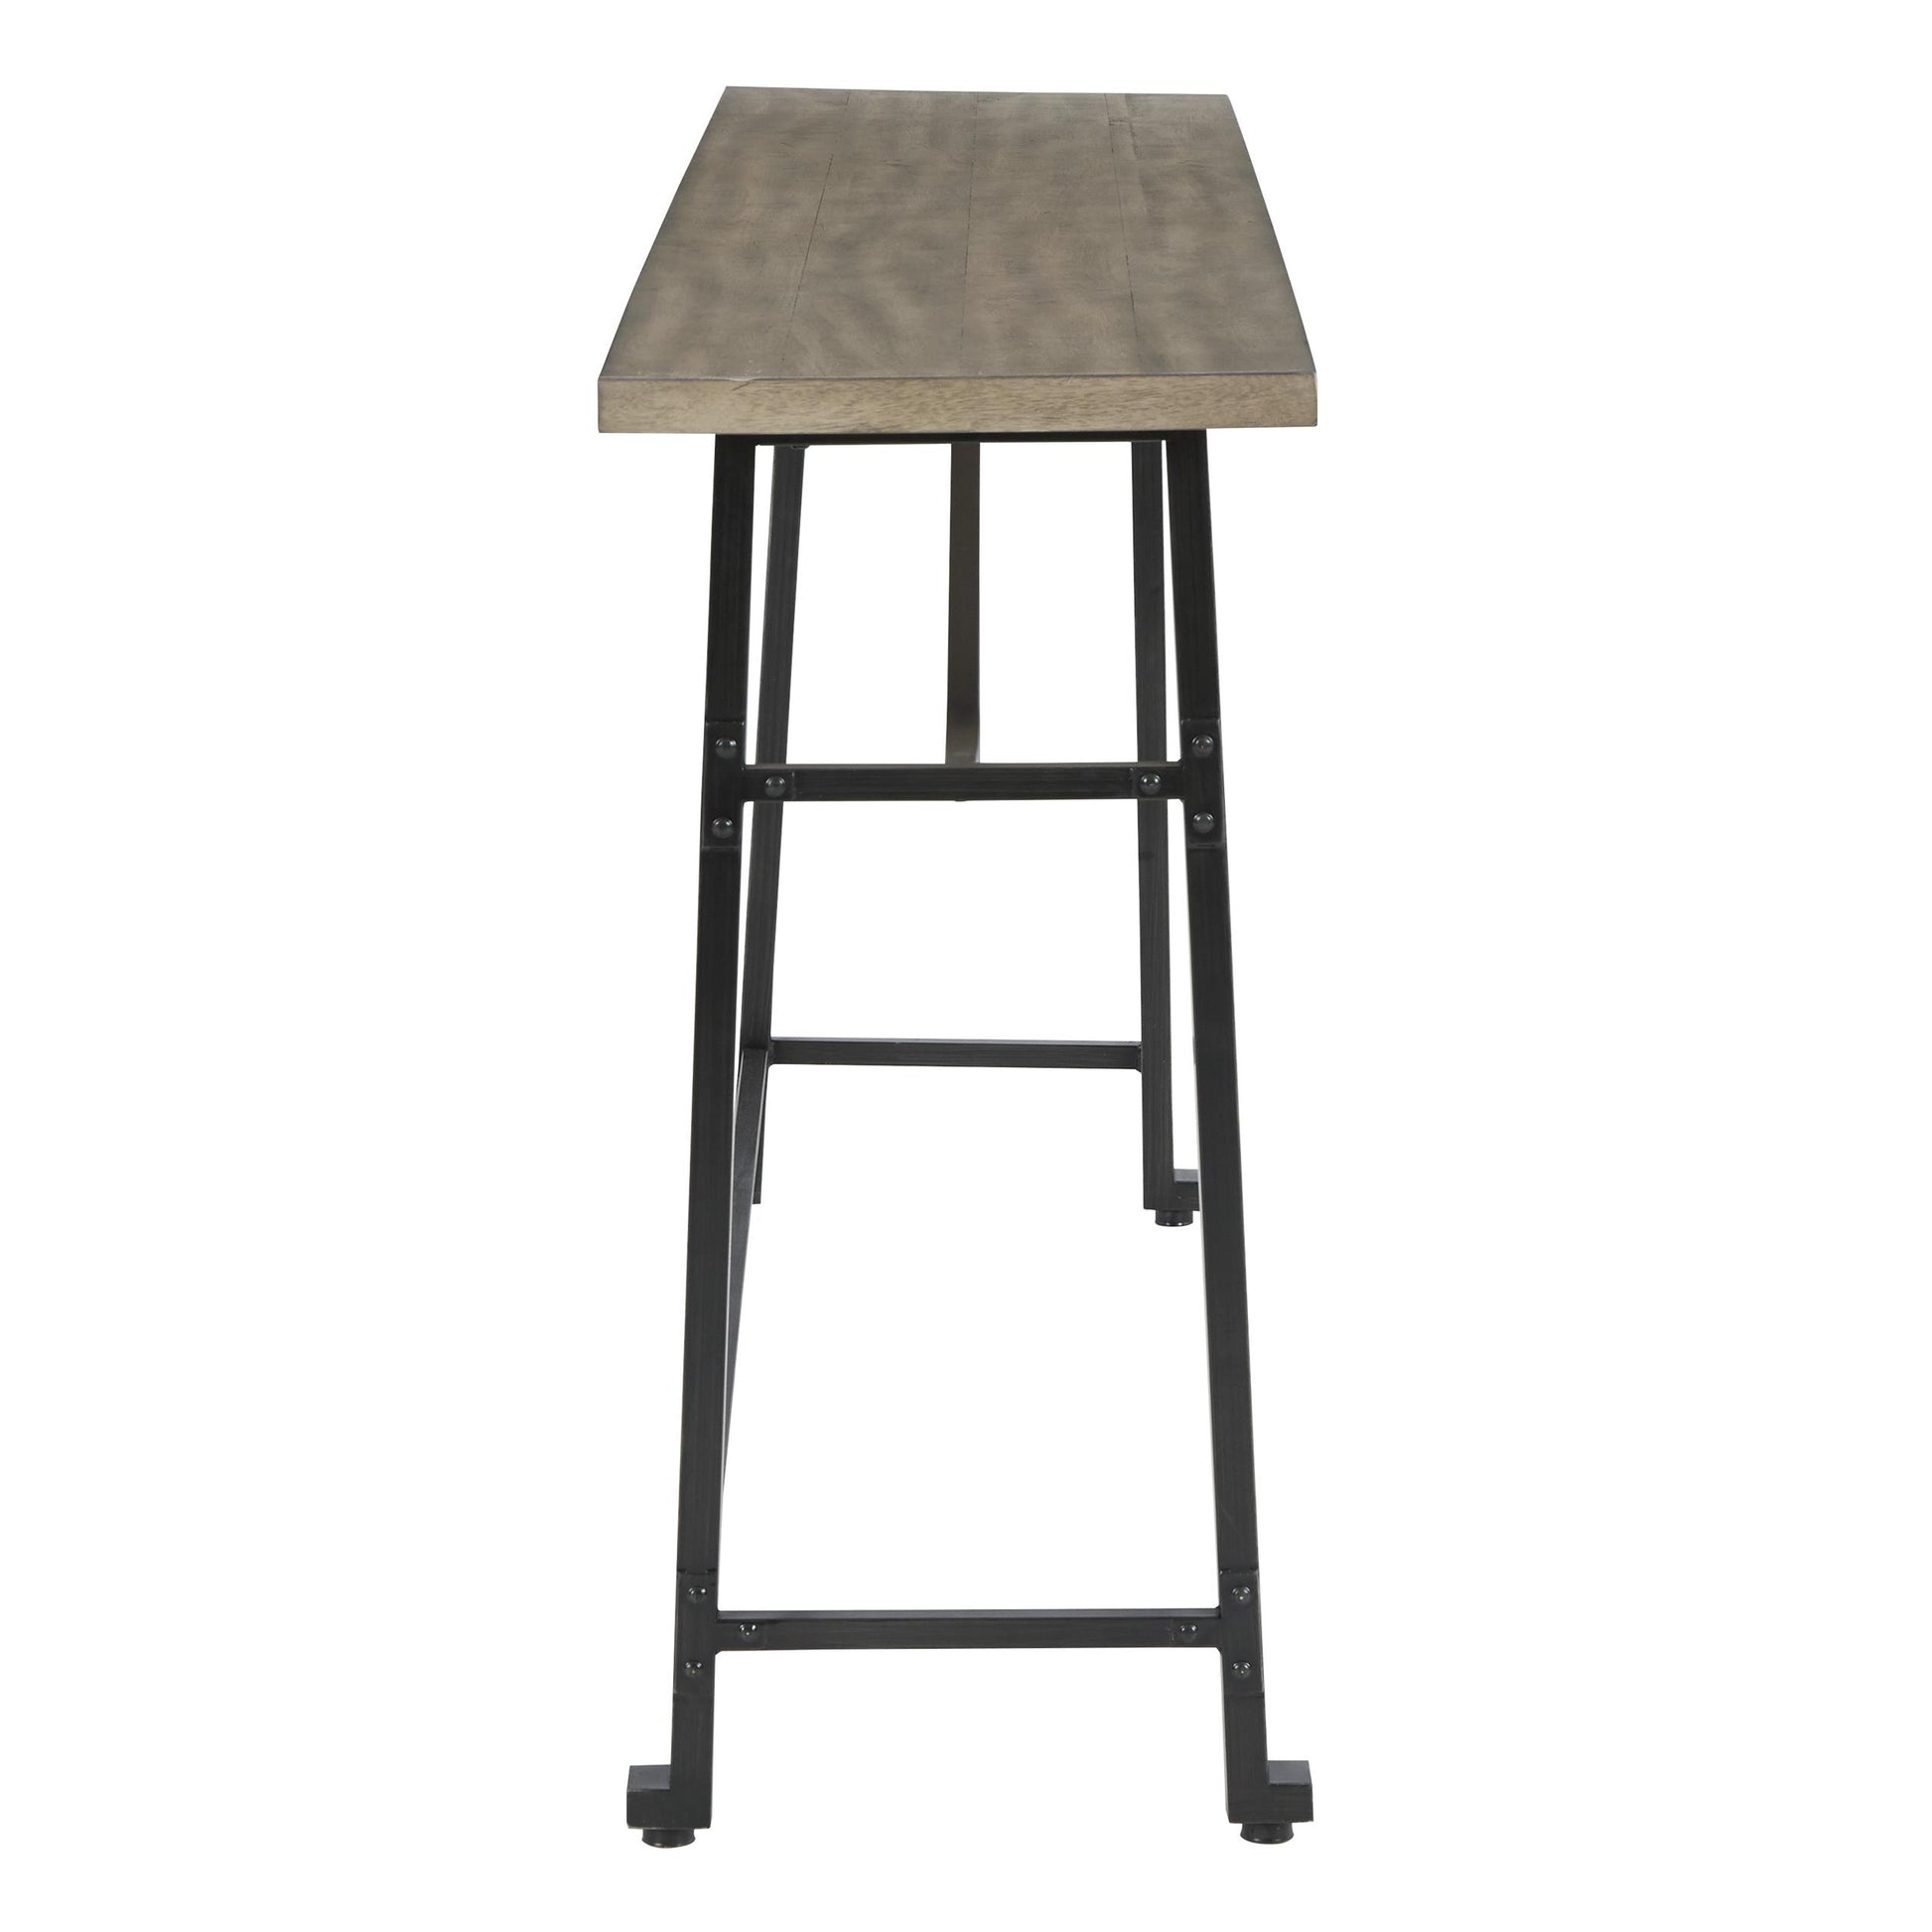 Signature Design by Ashley Lesterton Counter Height Dining Table with Trestle Base D334-52 IMAGE 3